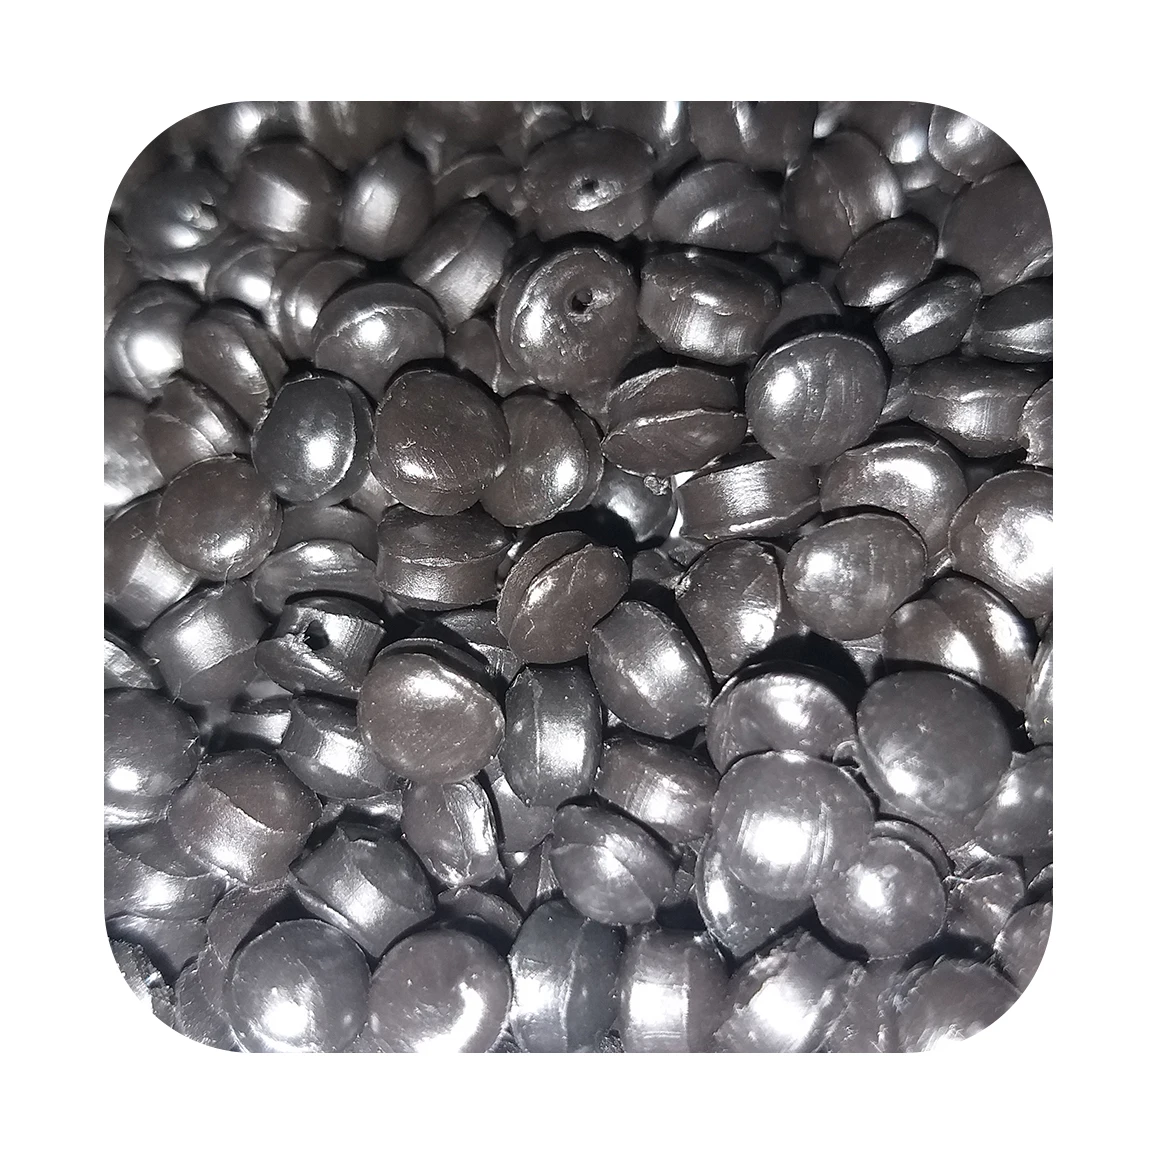 Recycled Granulated Plastic Polymer Polypropylene (עמ'), Round Shape, Industrial/Business Usage, Lowest Prices on The Market